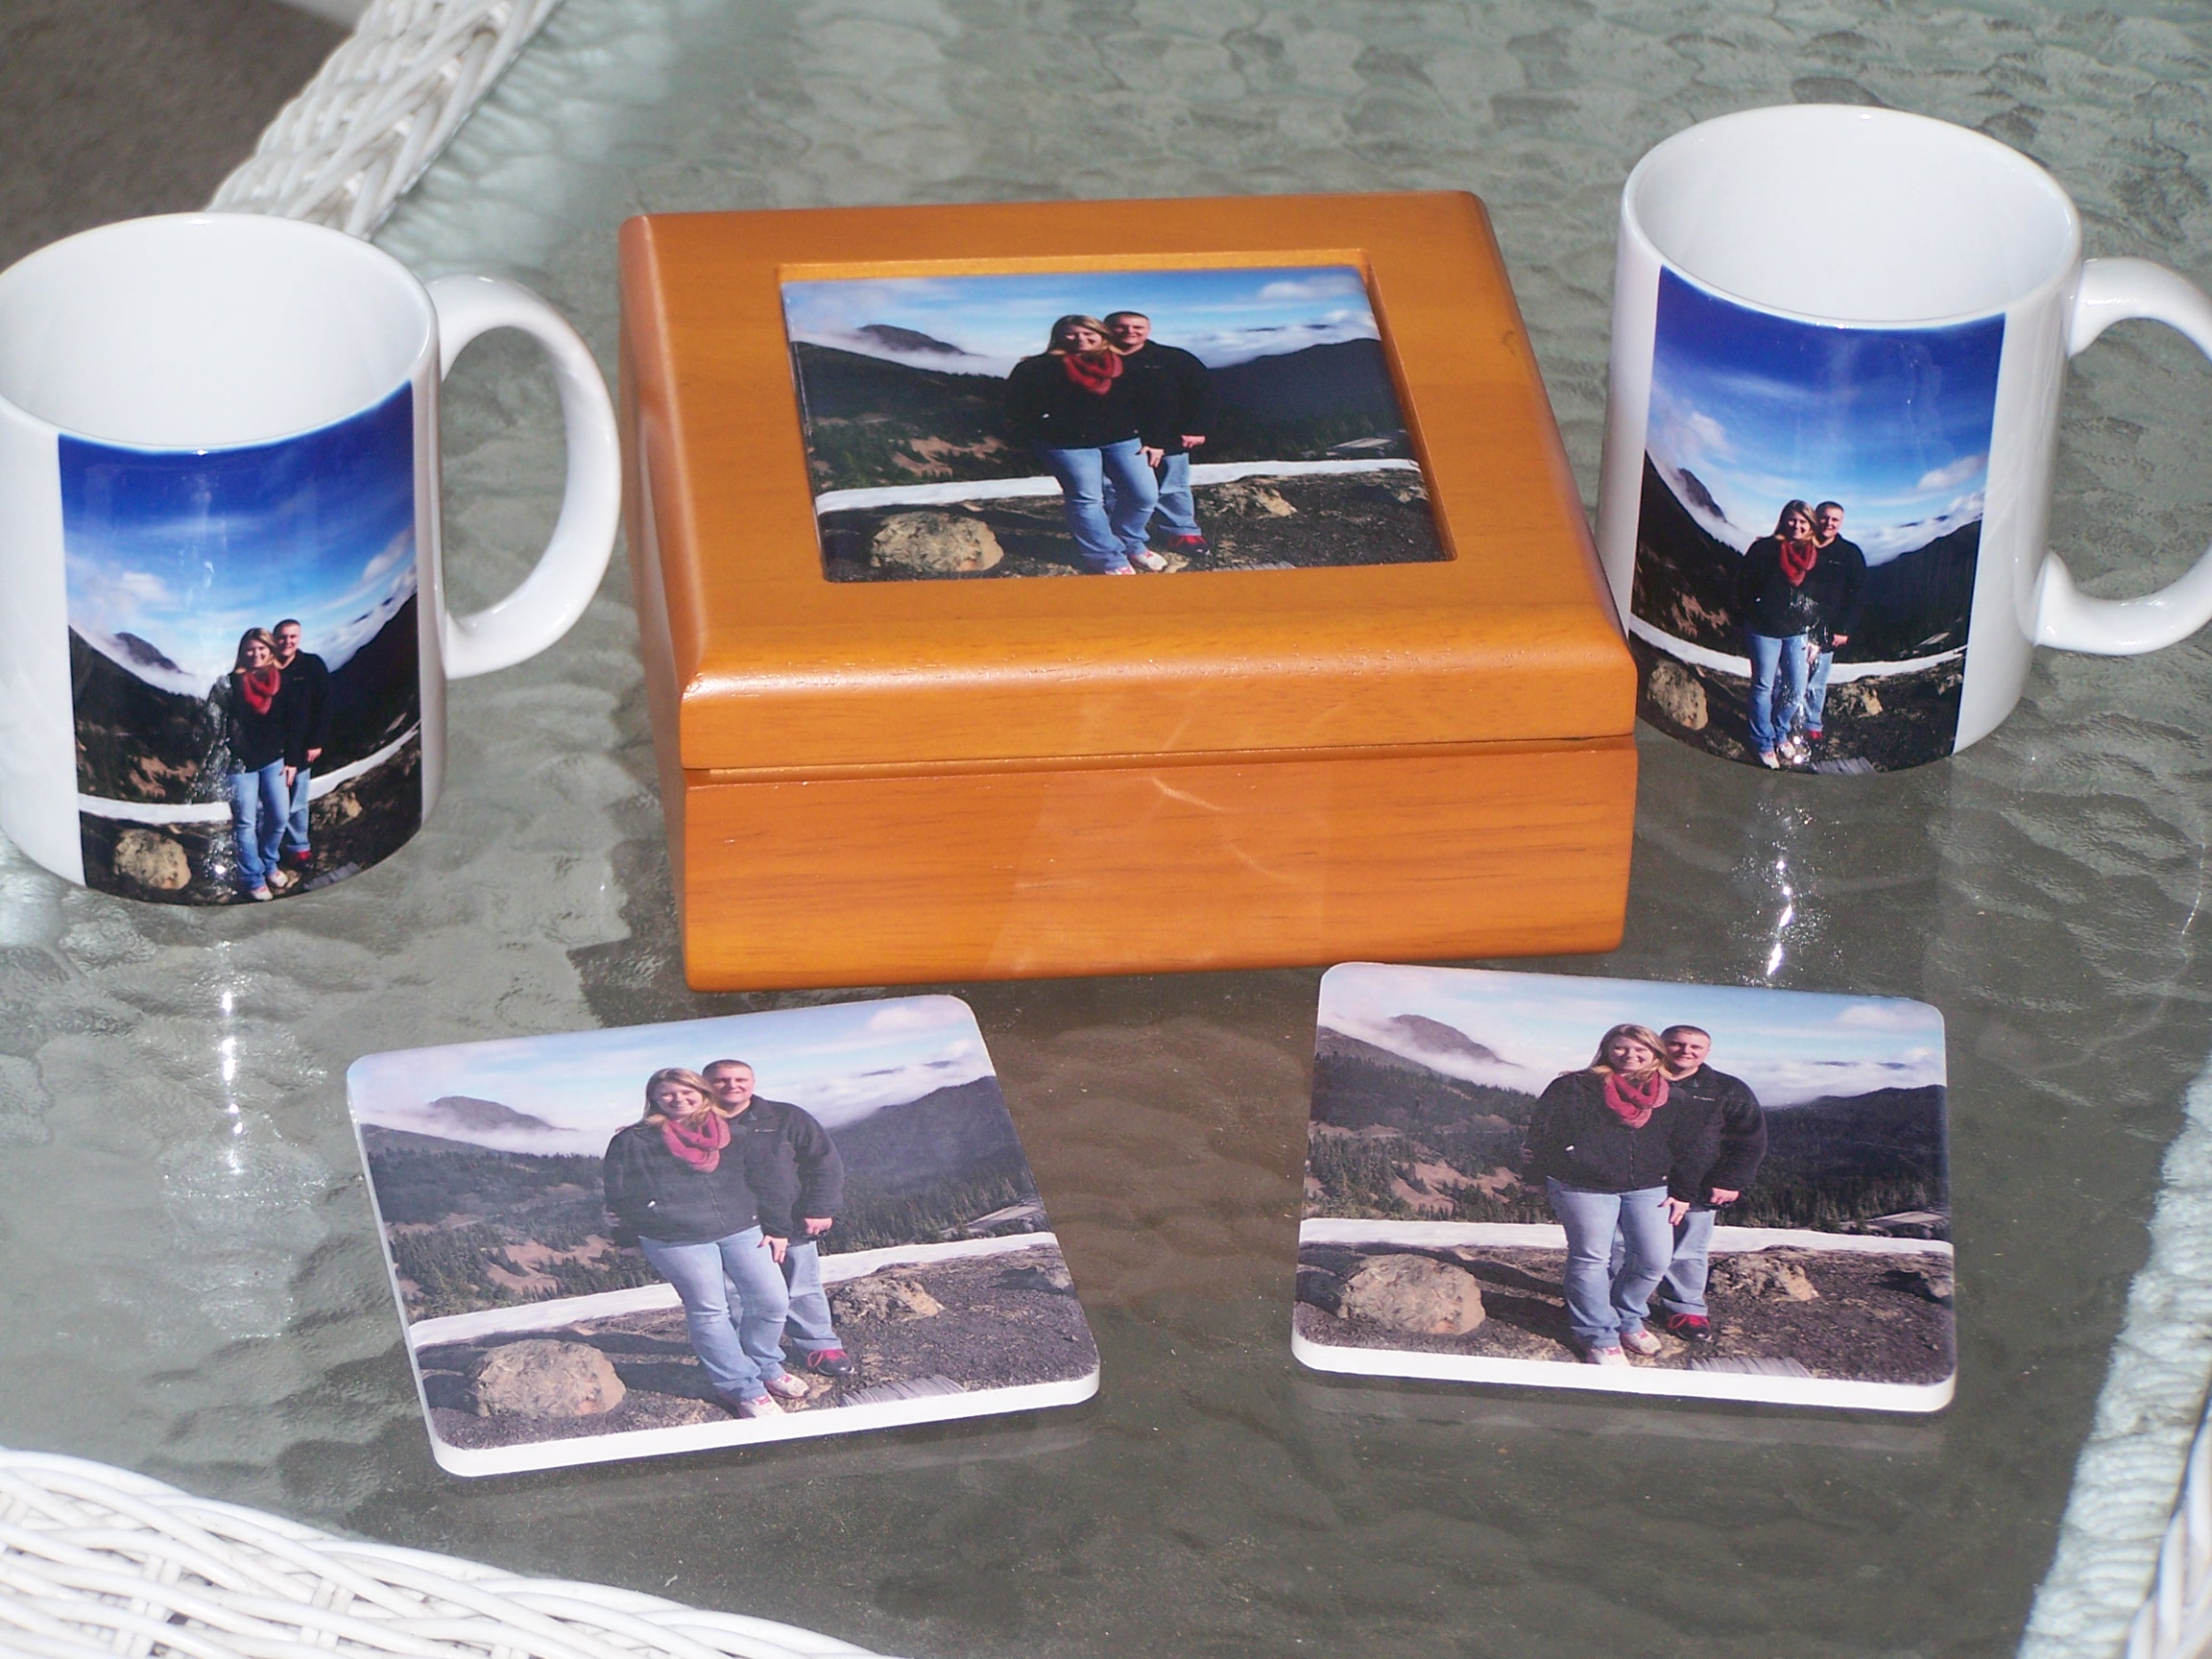 Wedding shower gift set made with sublimation printing